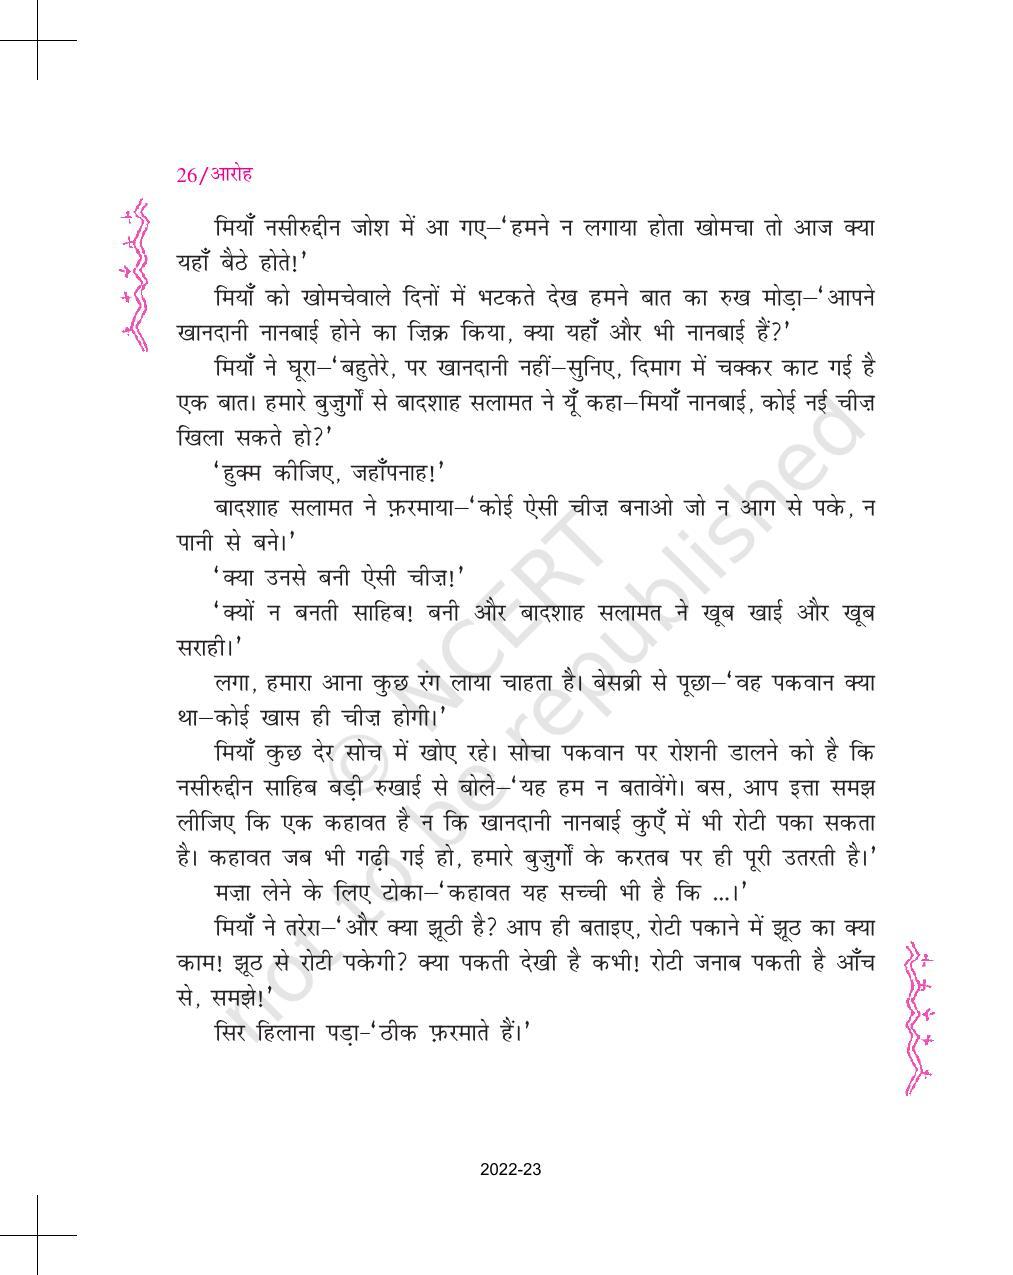 NCERT Book for Class 11 Hindi Aroh Chapter 2 मियाँ नसीरुद्दीन - Page 7